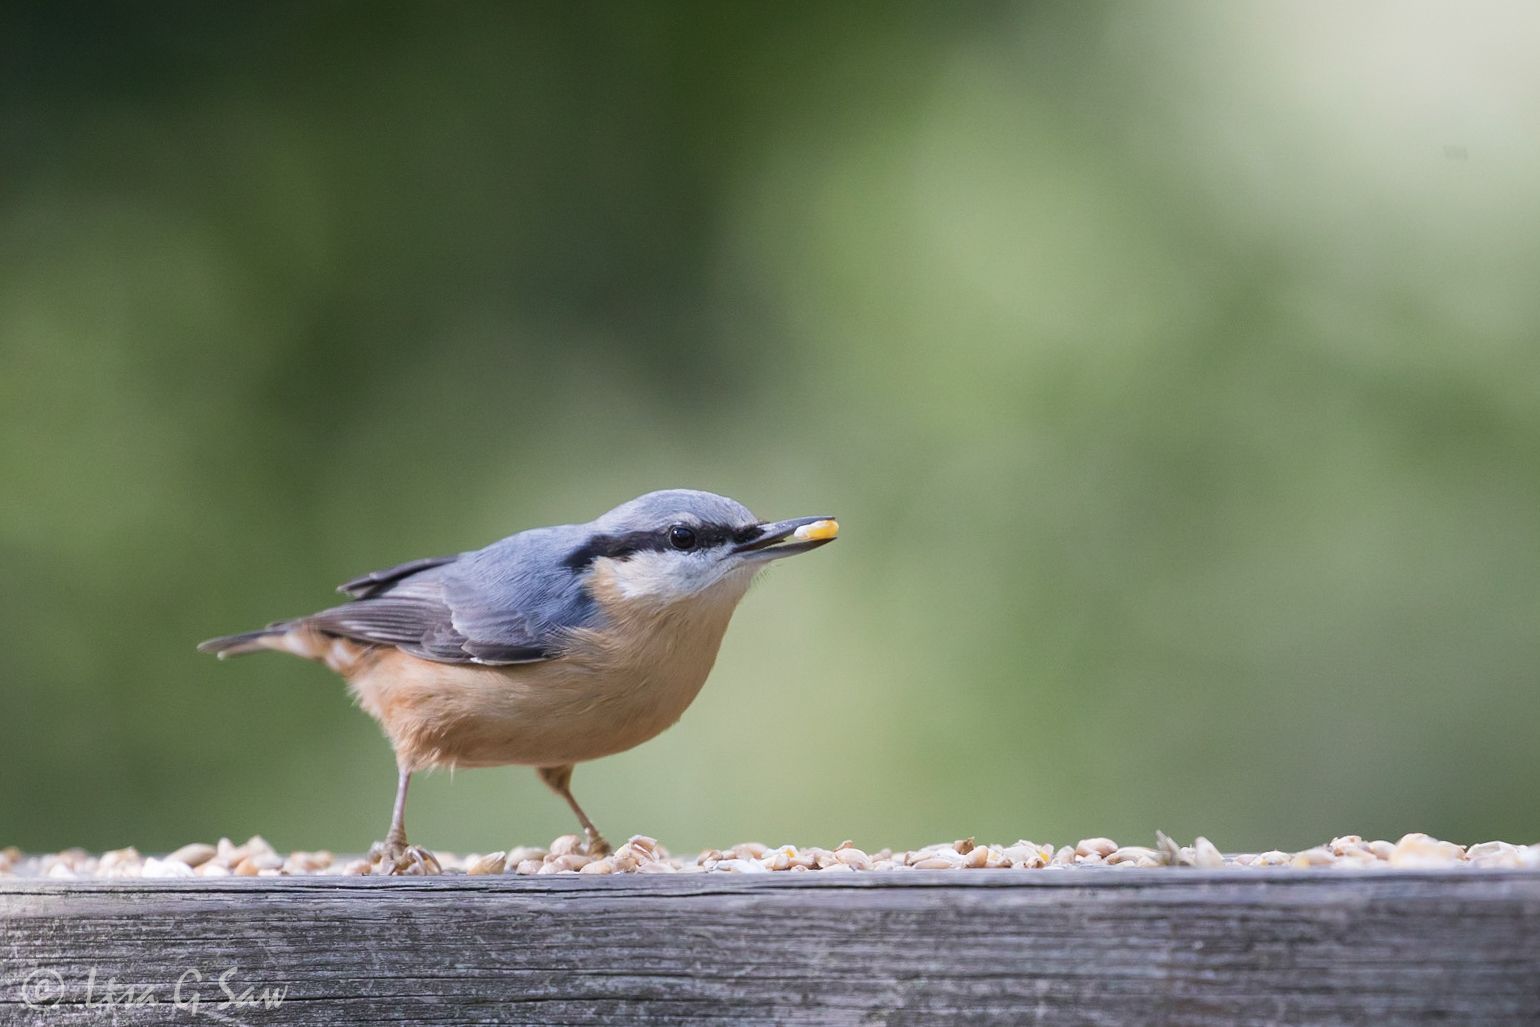 Nuthatch with bird seed in its beak